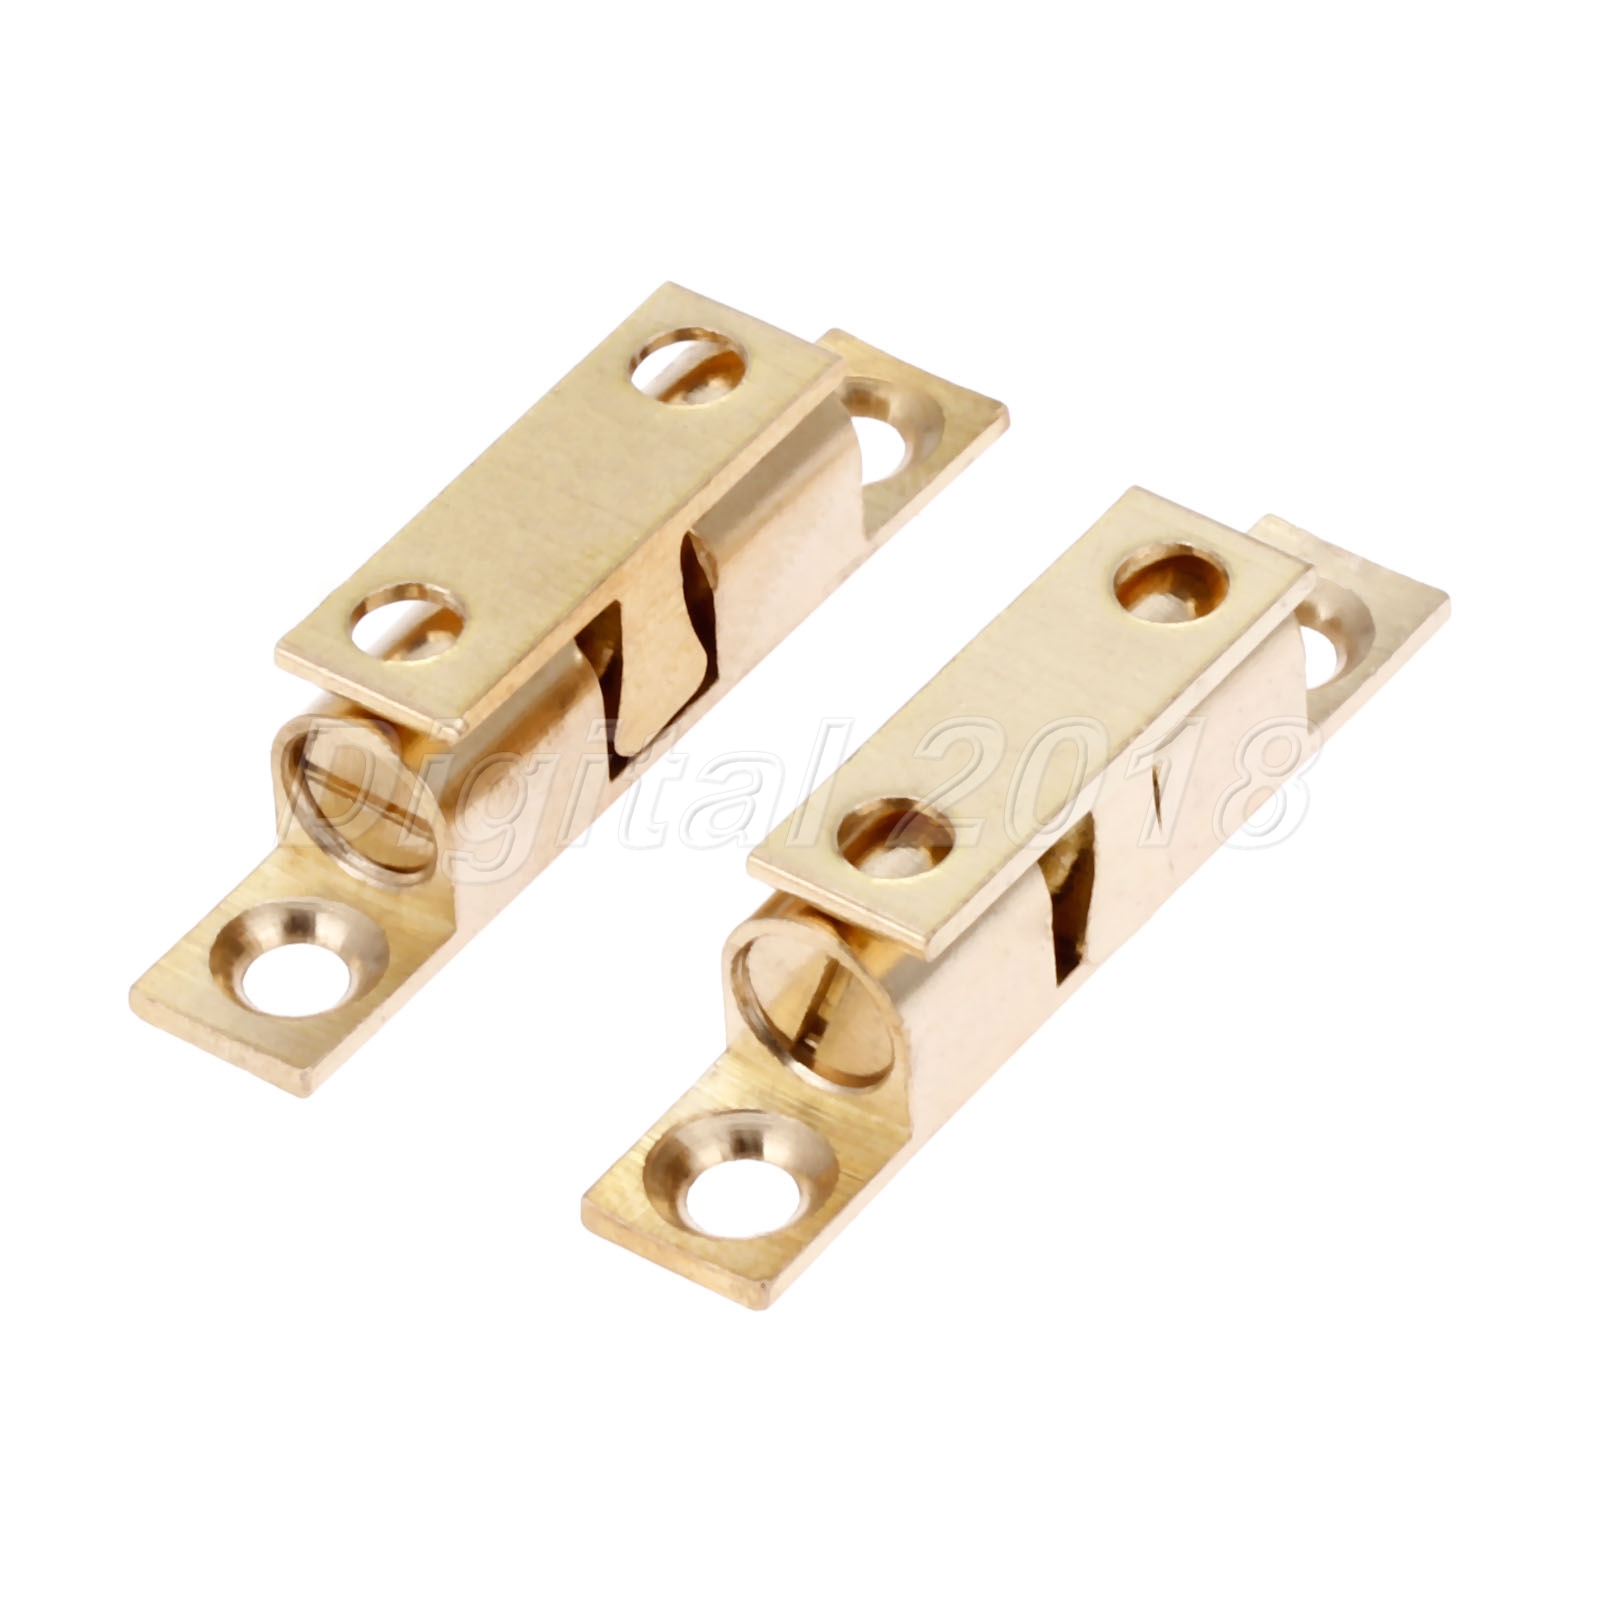 Brass Tone Drawer Cabinet Door Latch Clip Lock Durable Ball Touch Catches 42mm